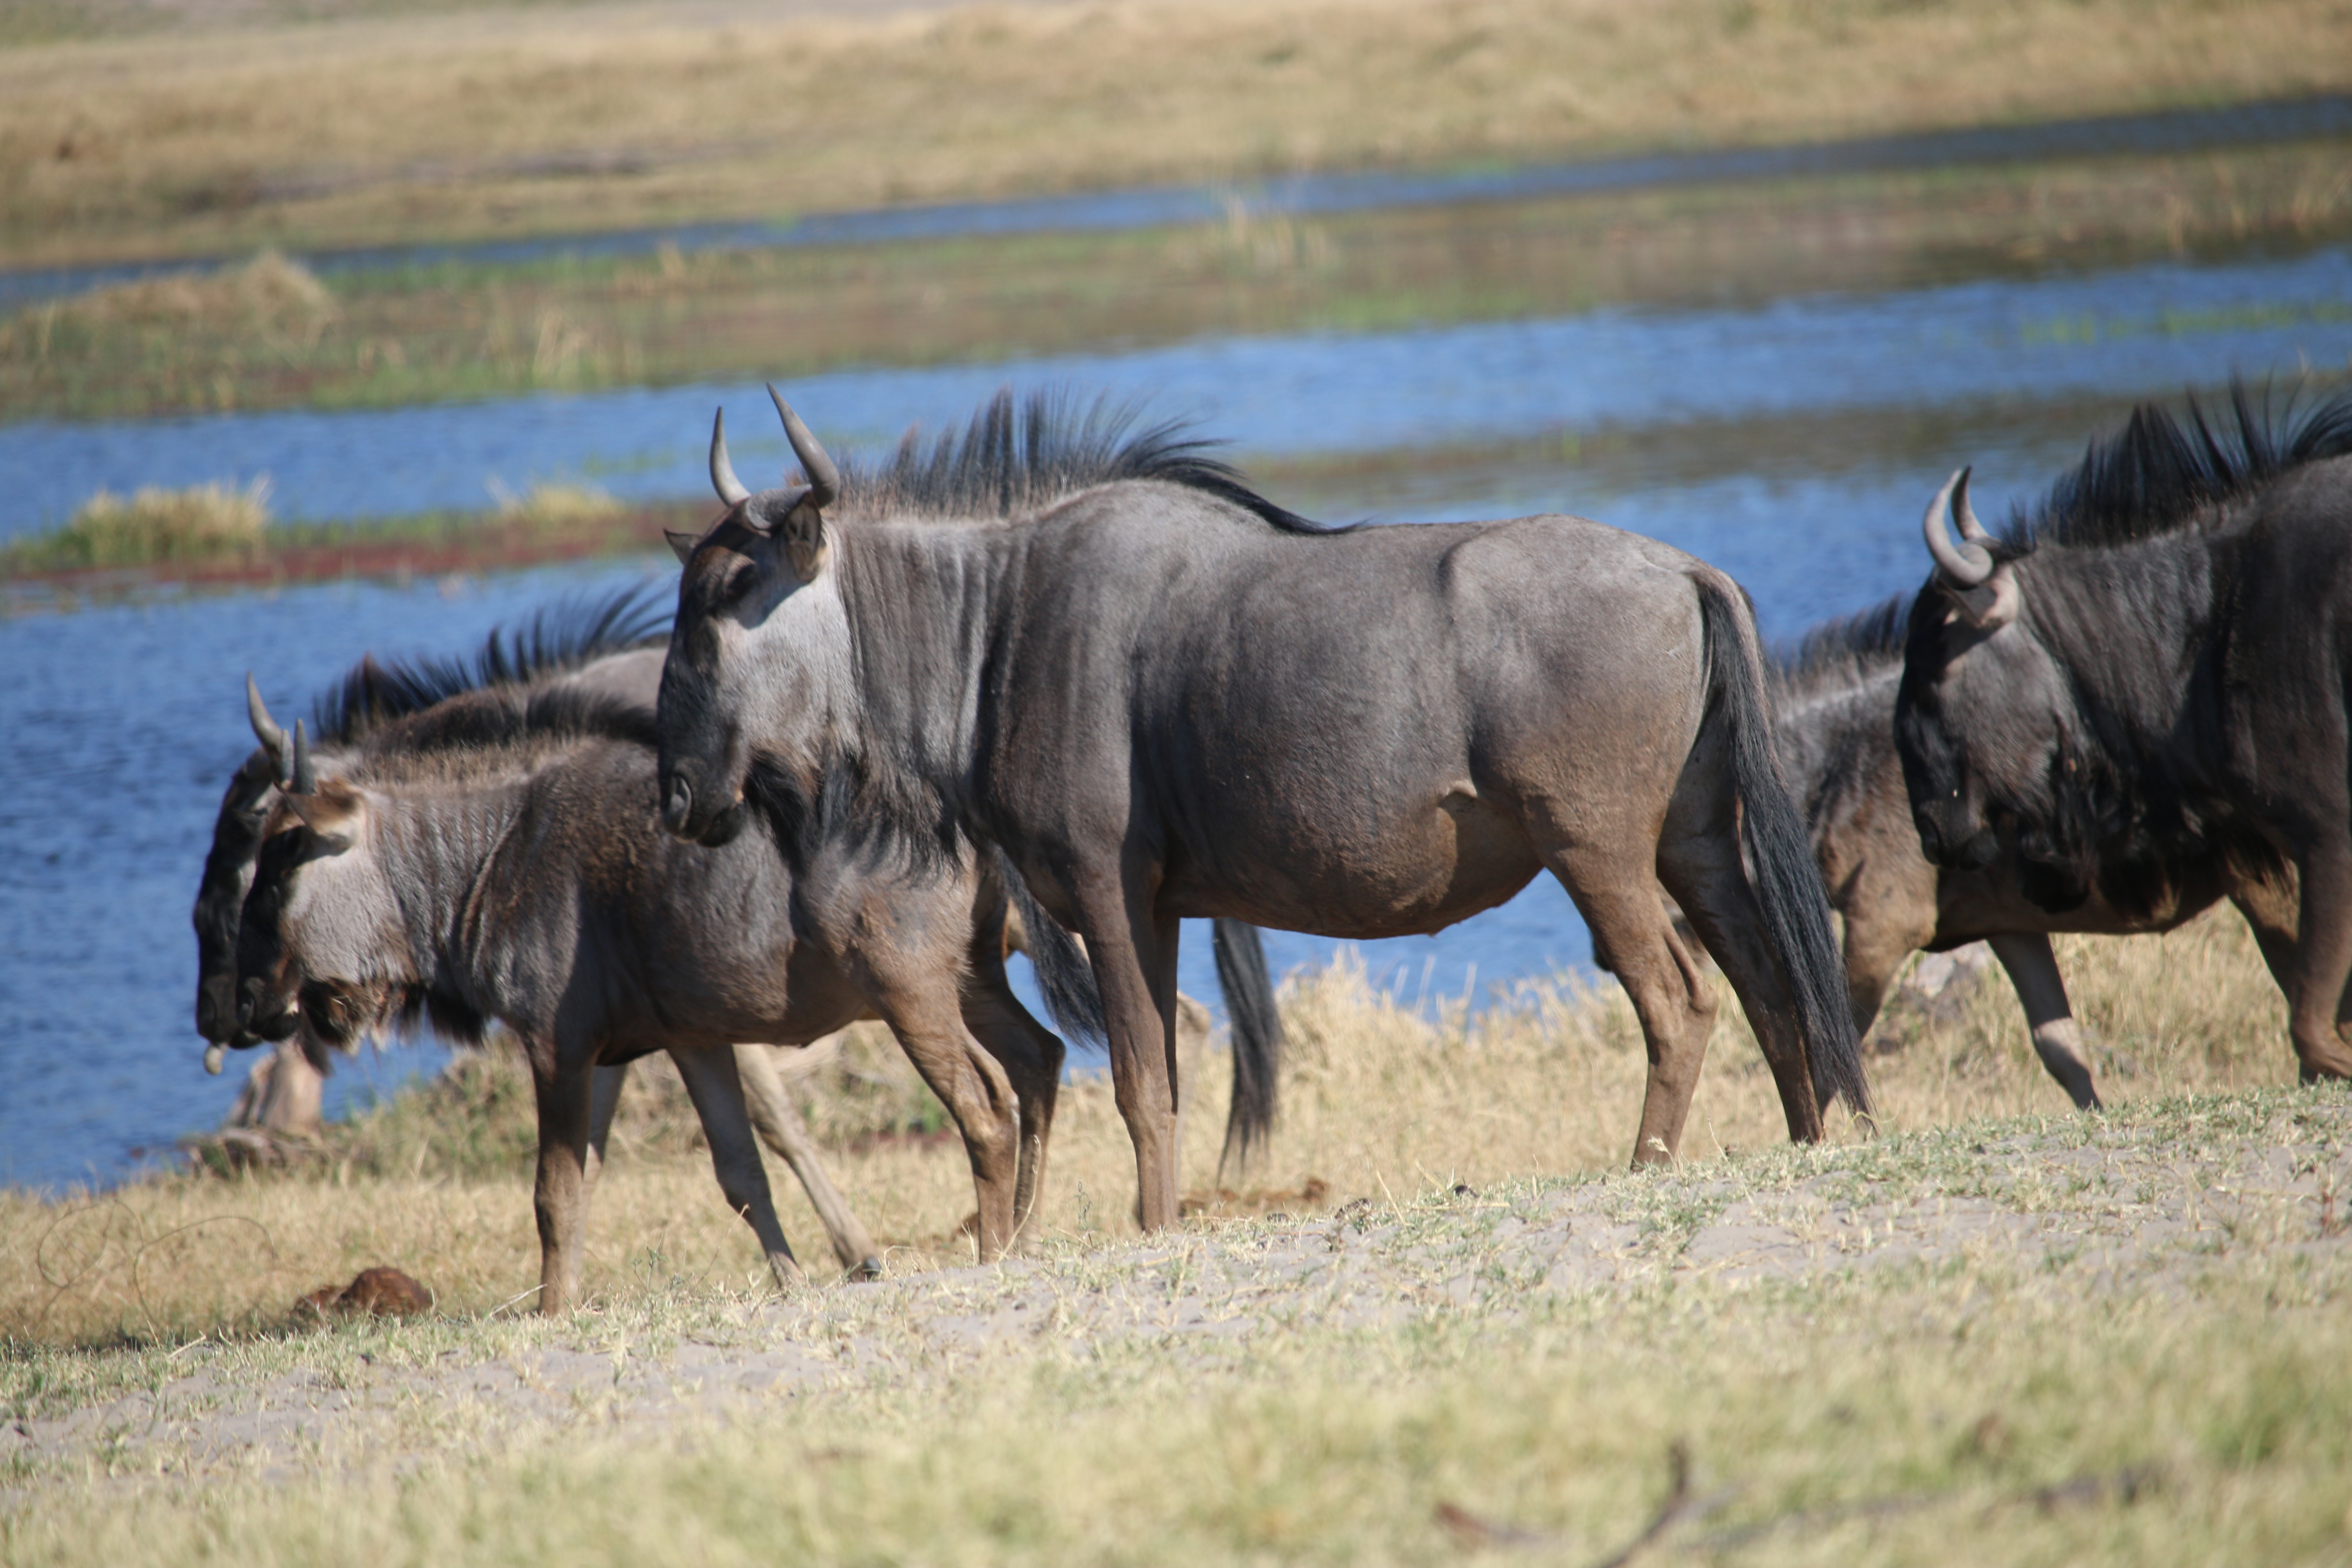 Wildebeest, not pretty, but pretty cool for sure! 